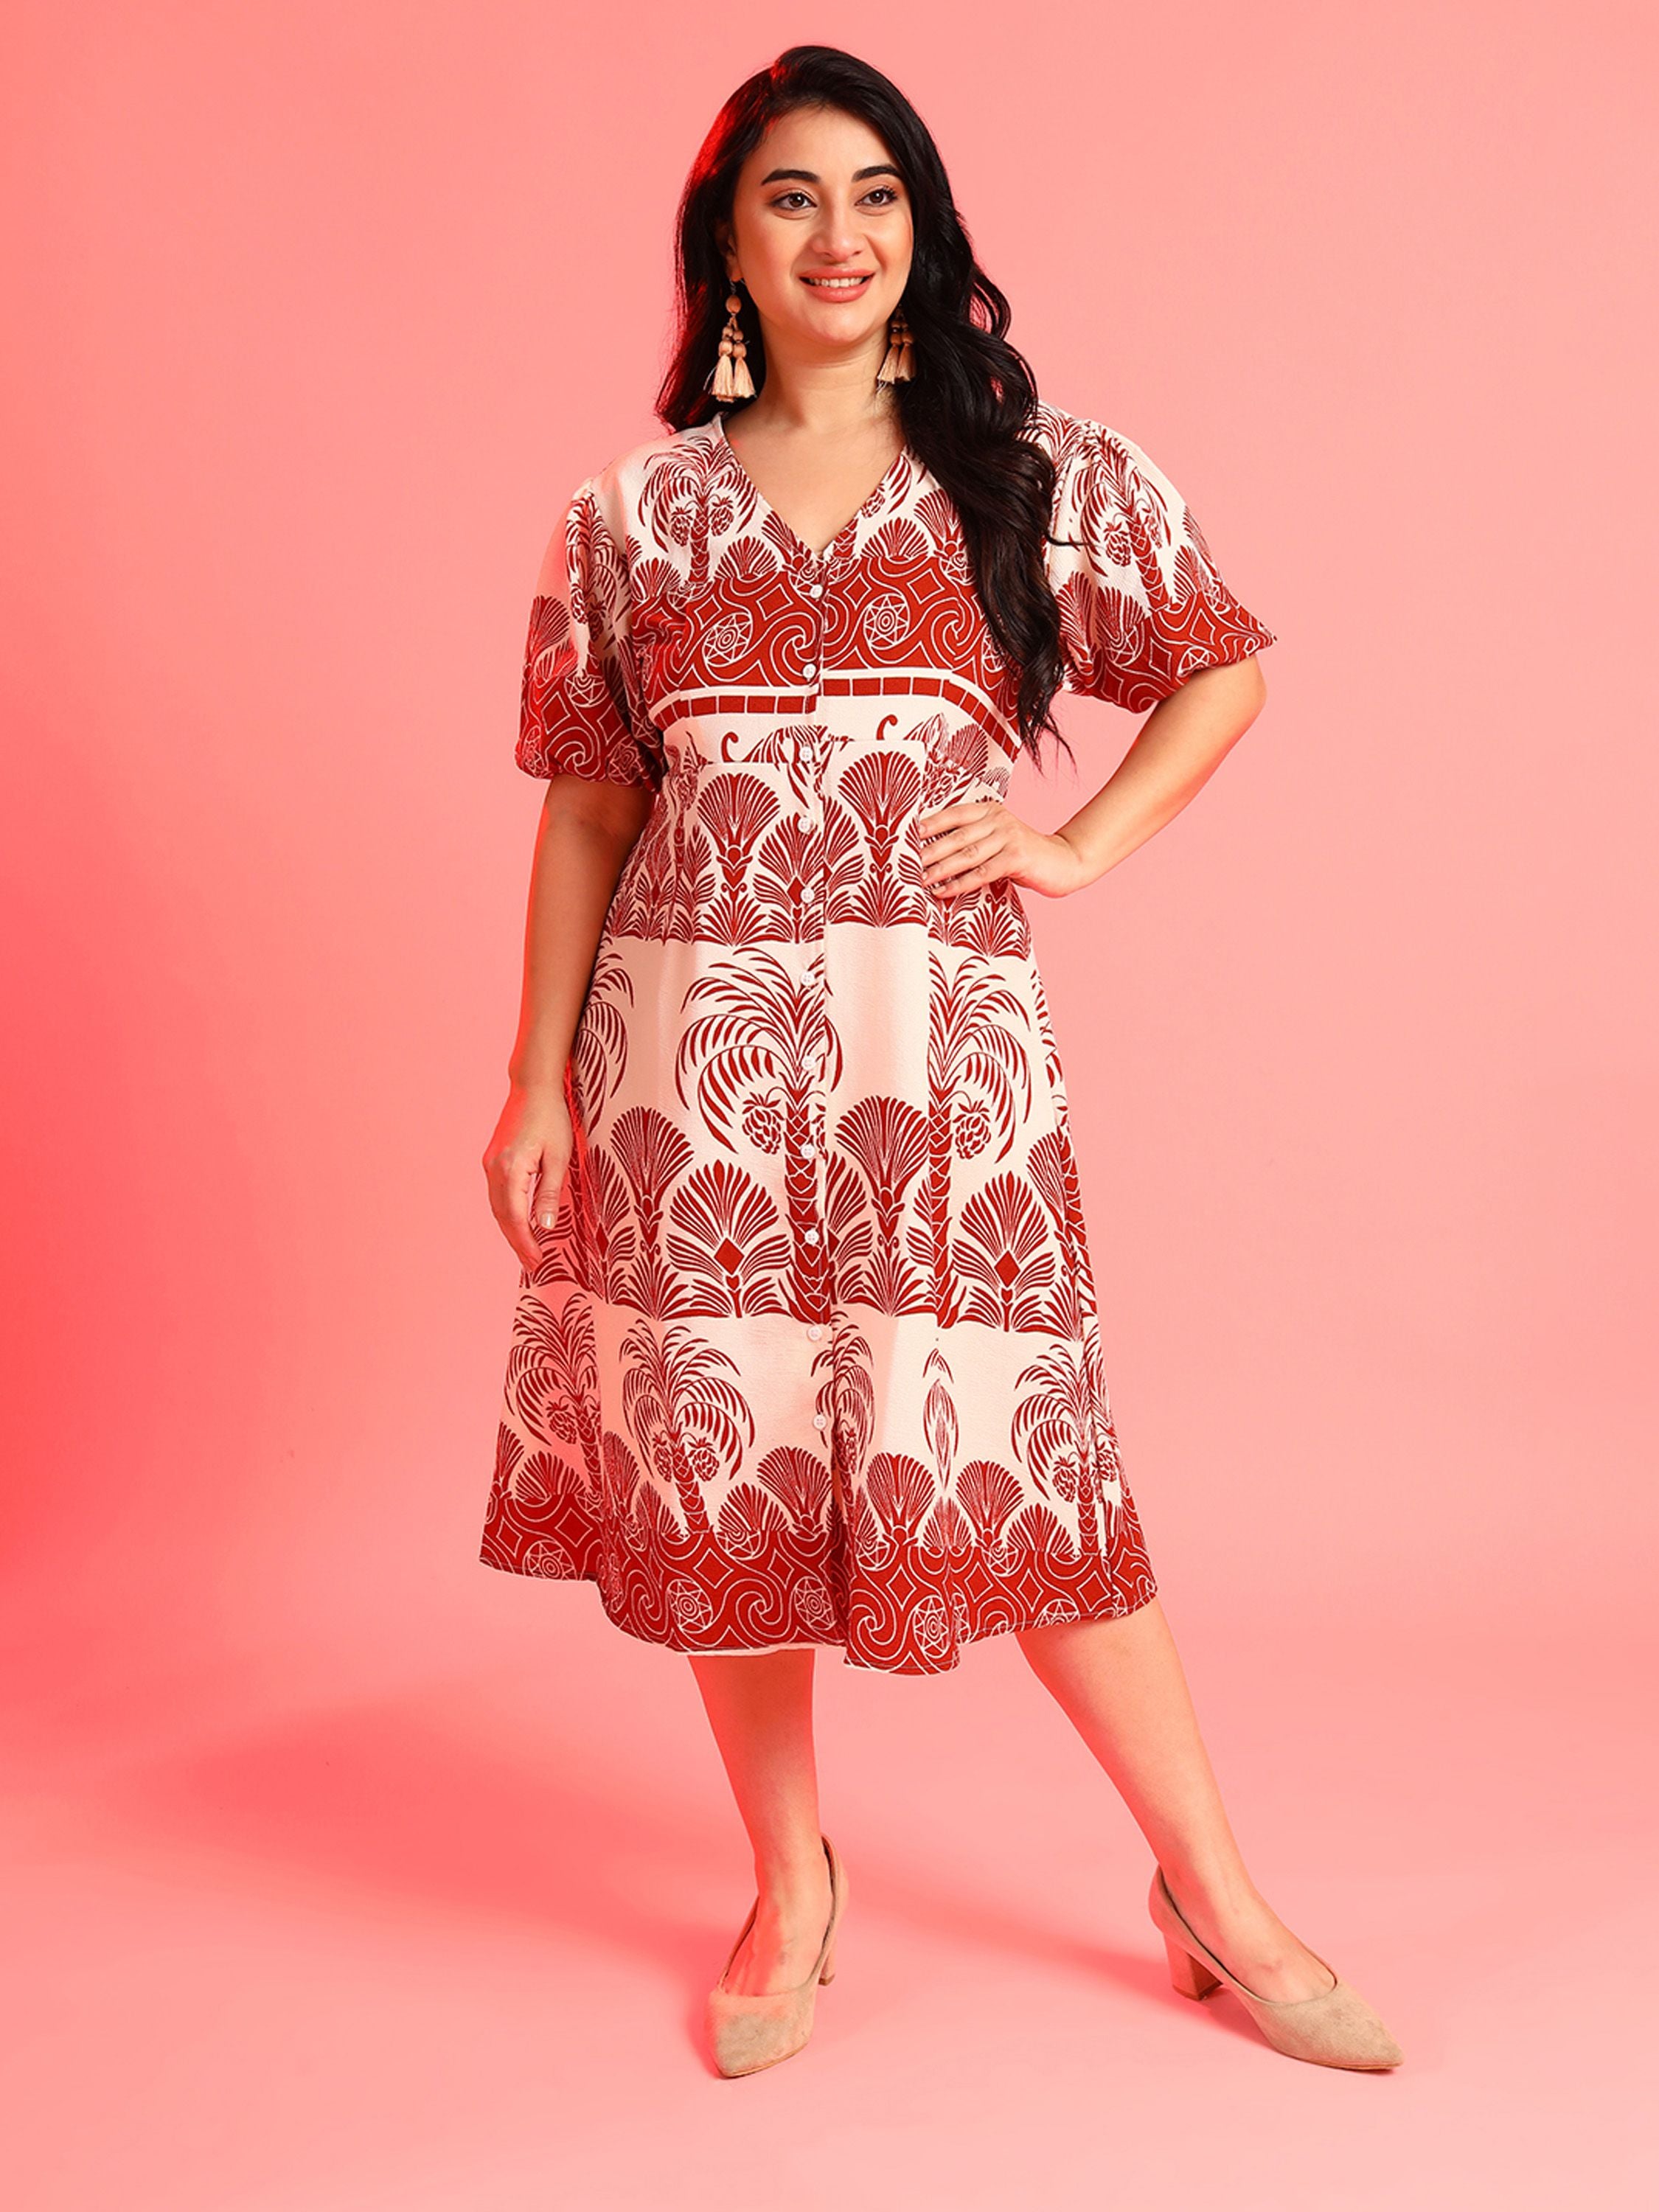 Plus Size Women Floral Design Stylish Casual Dresses Red